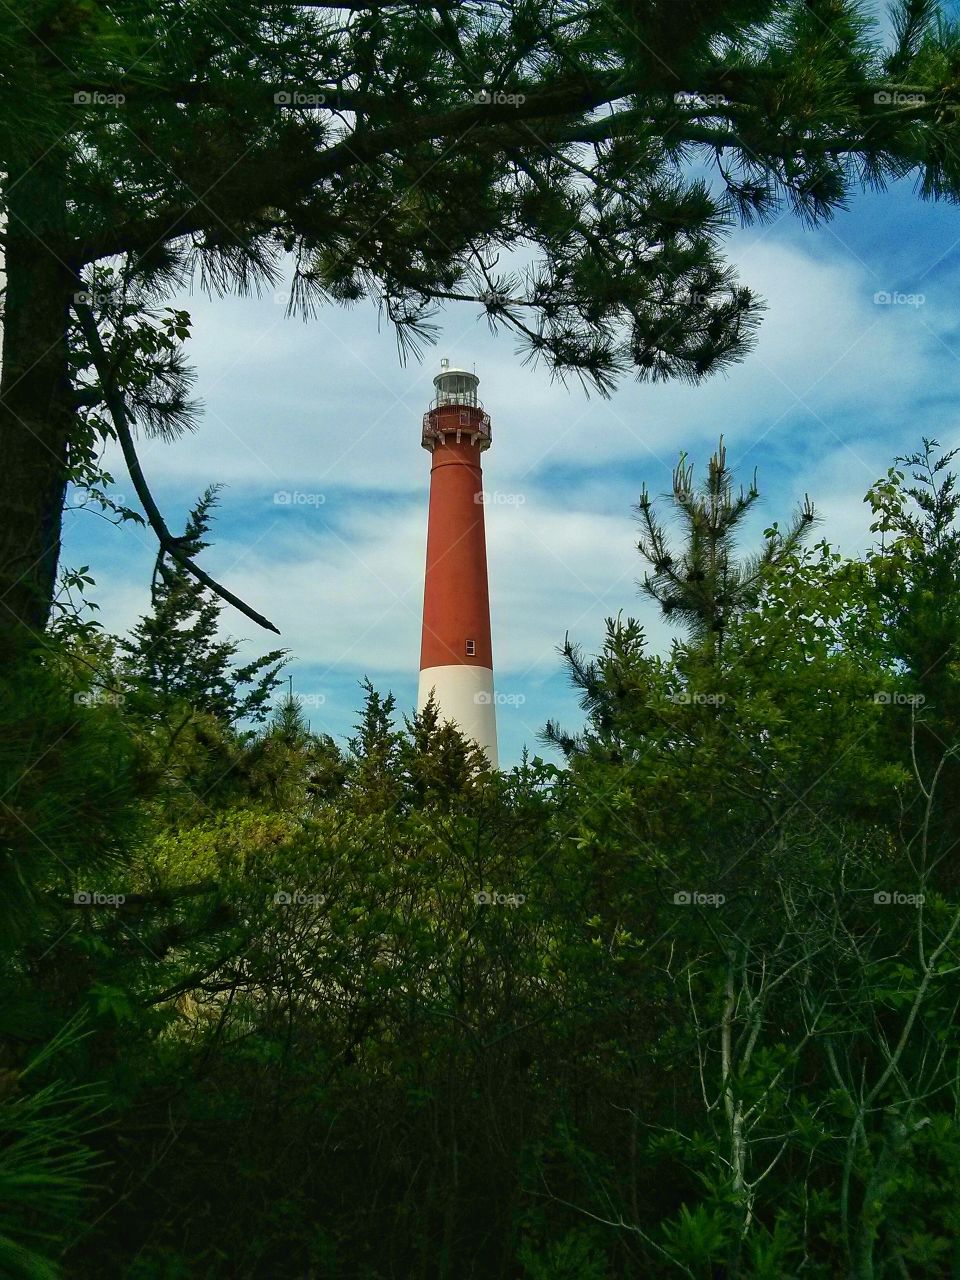 Barnegat Lighthouse from the Woods